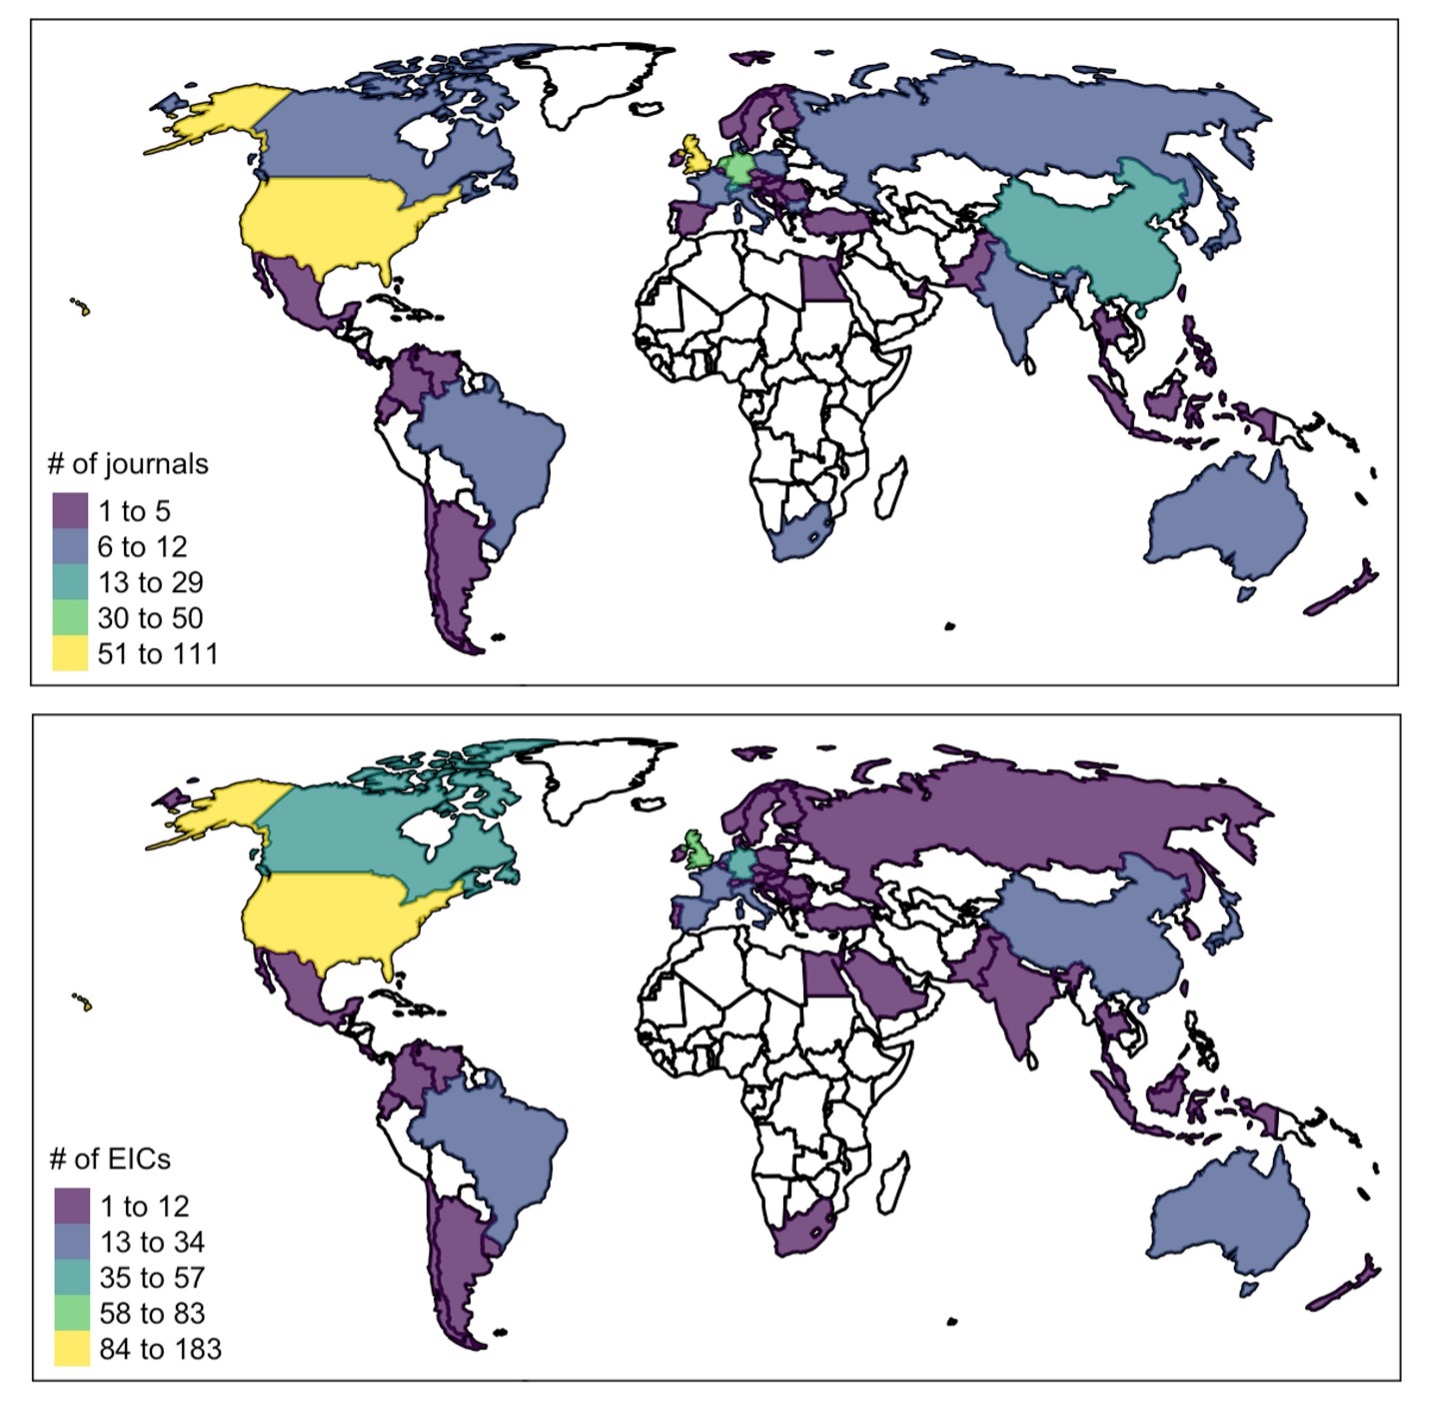 Journals and Editors-in-Chief are concentrated in few countries